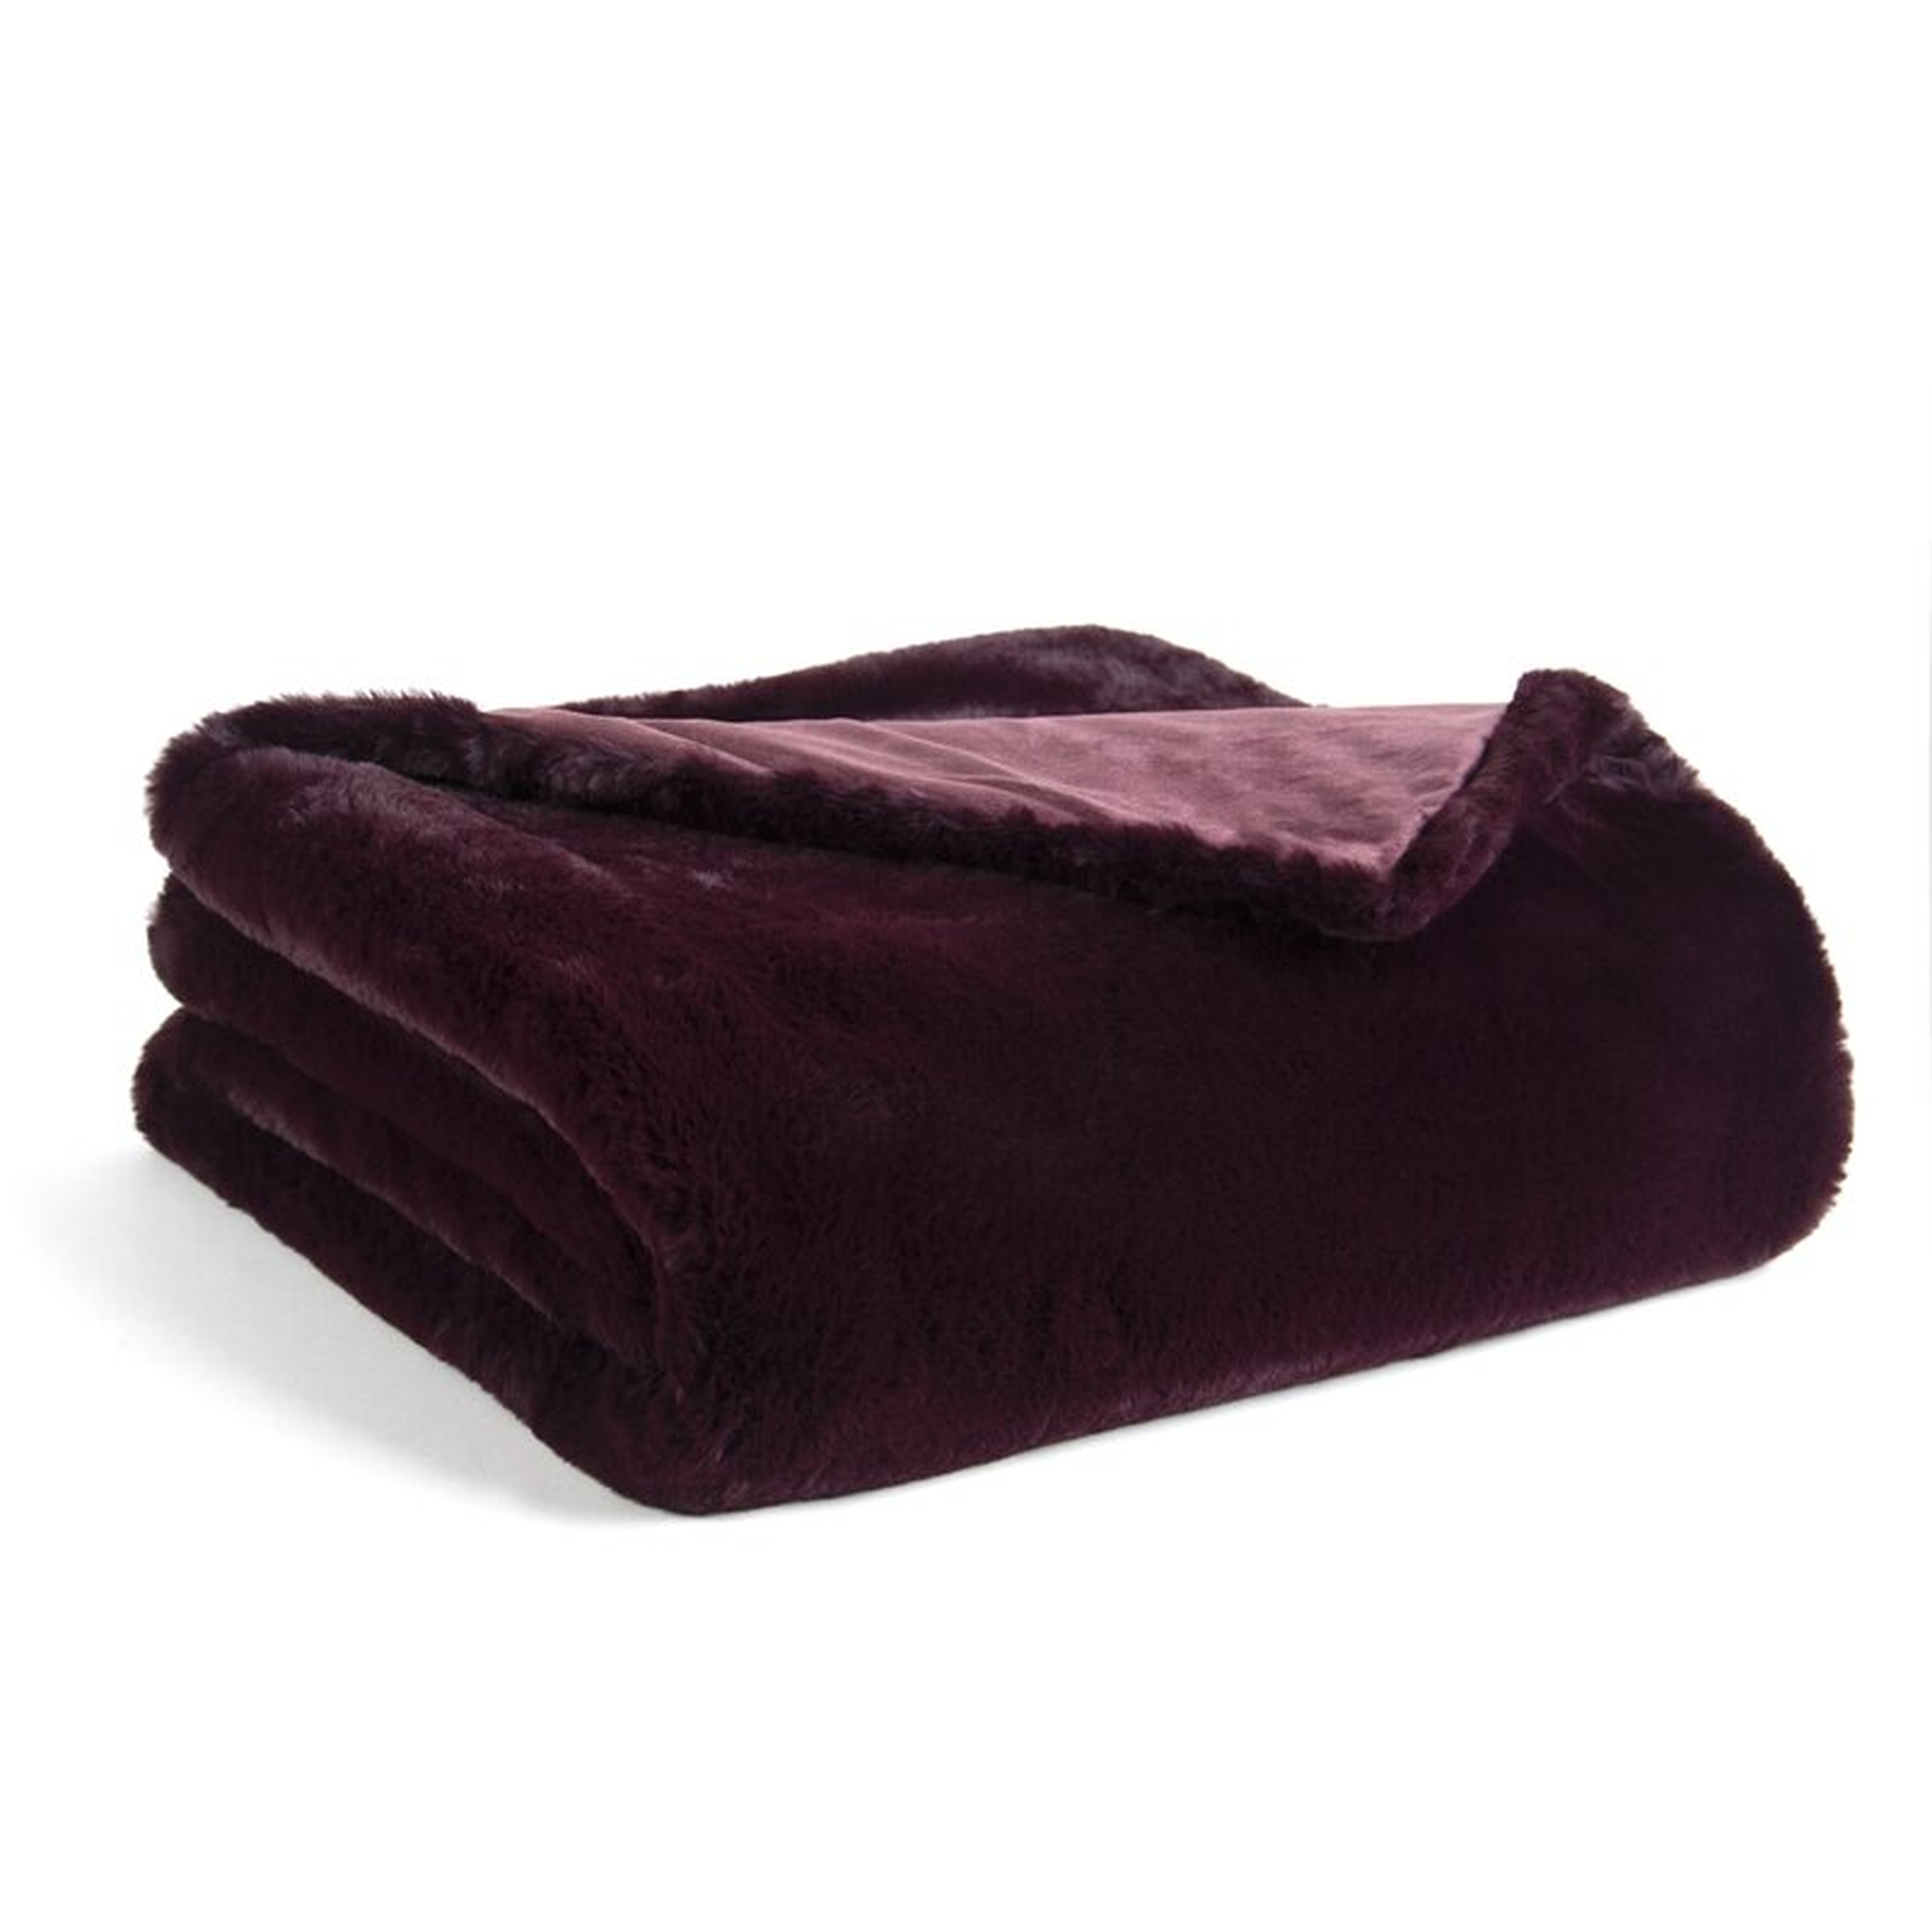 Mabry Super Soft Double Layer Faux Fur Throw - Wayfair